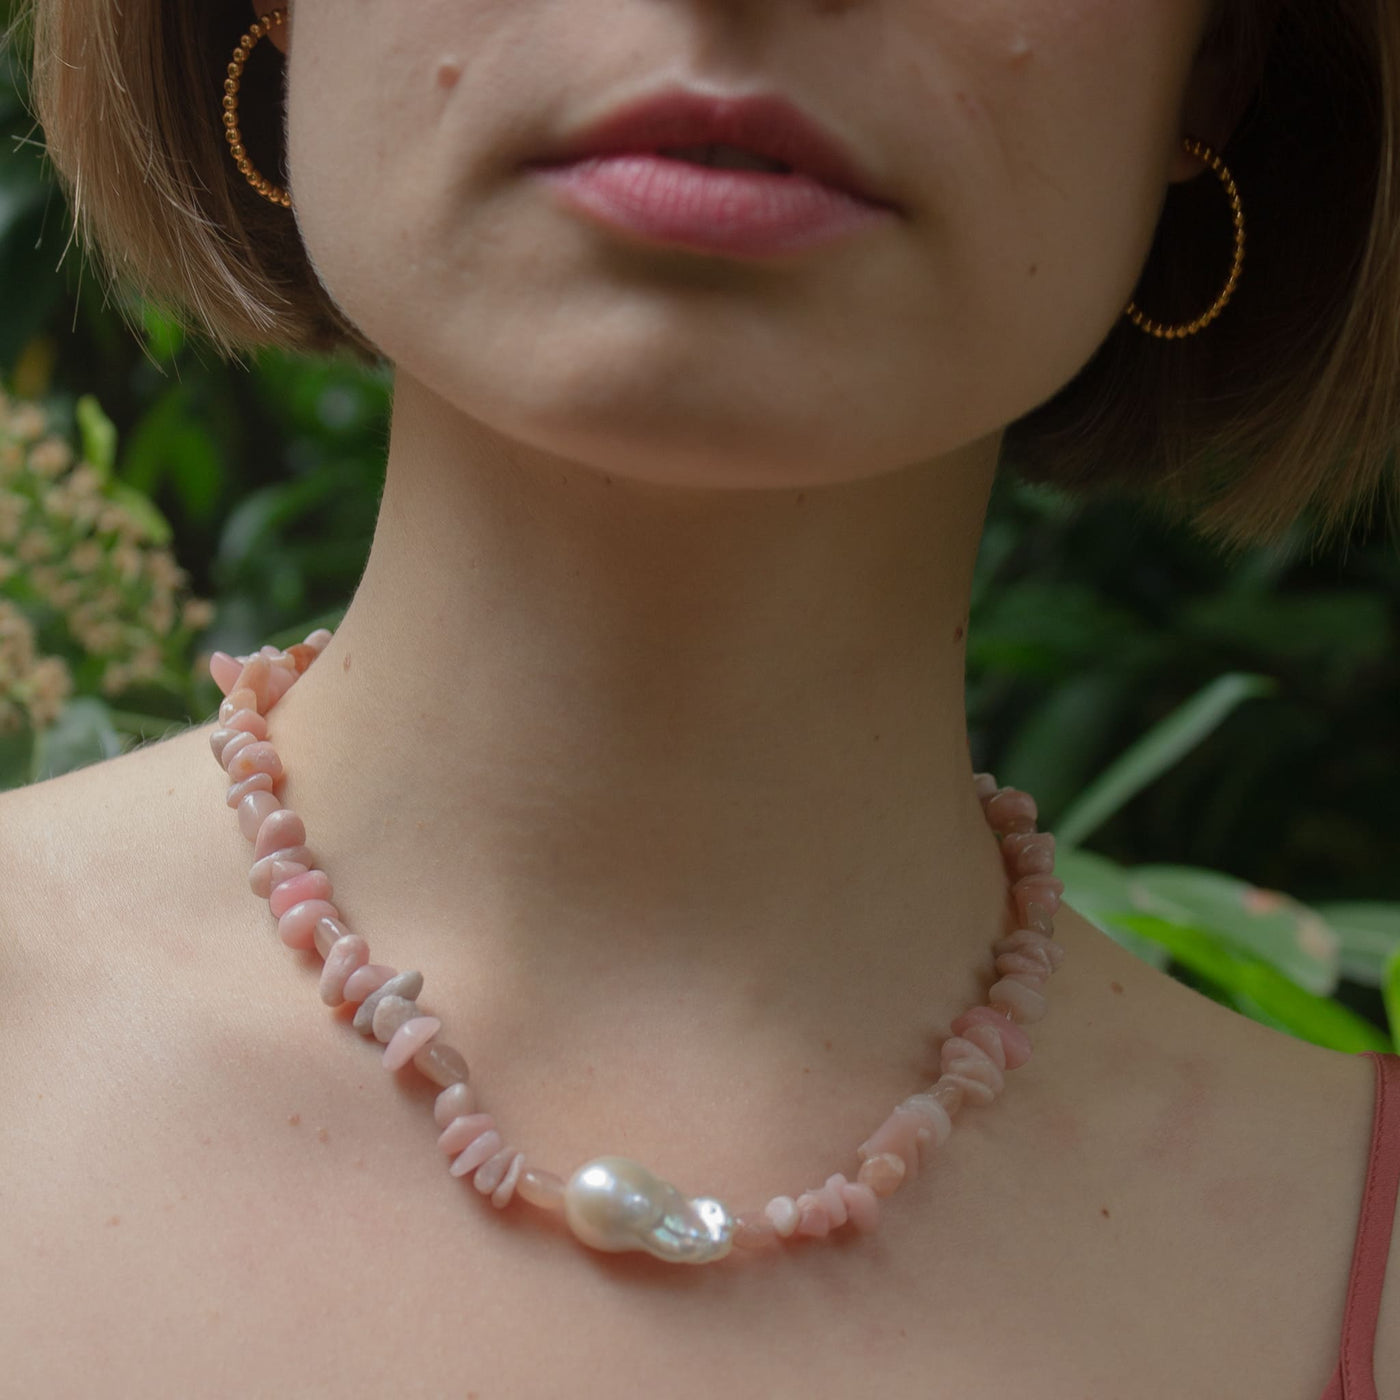 KERTEMINDE // Necklace with elongated &amp; round freshwater pearls clasp in gold plating